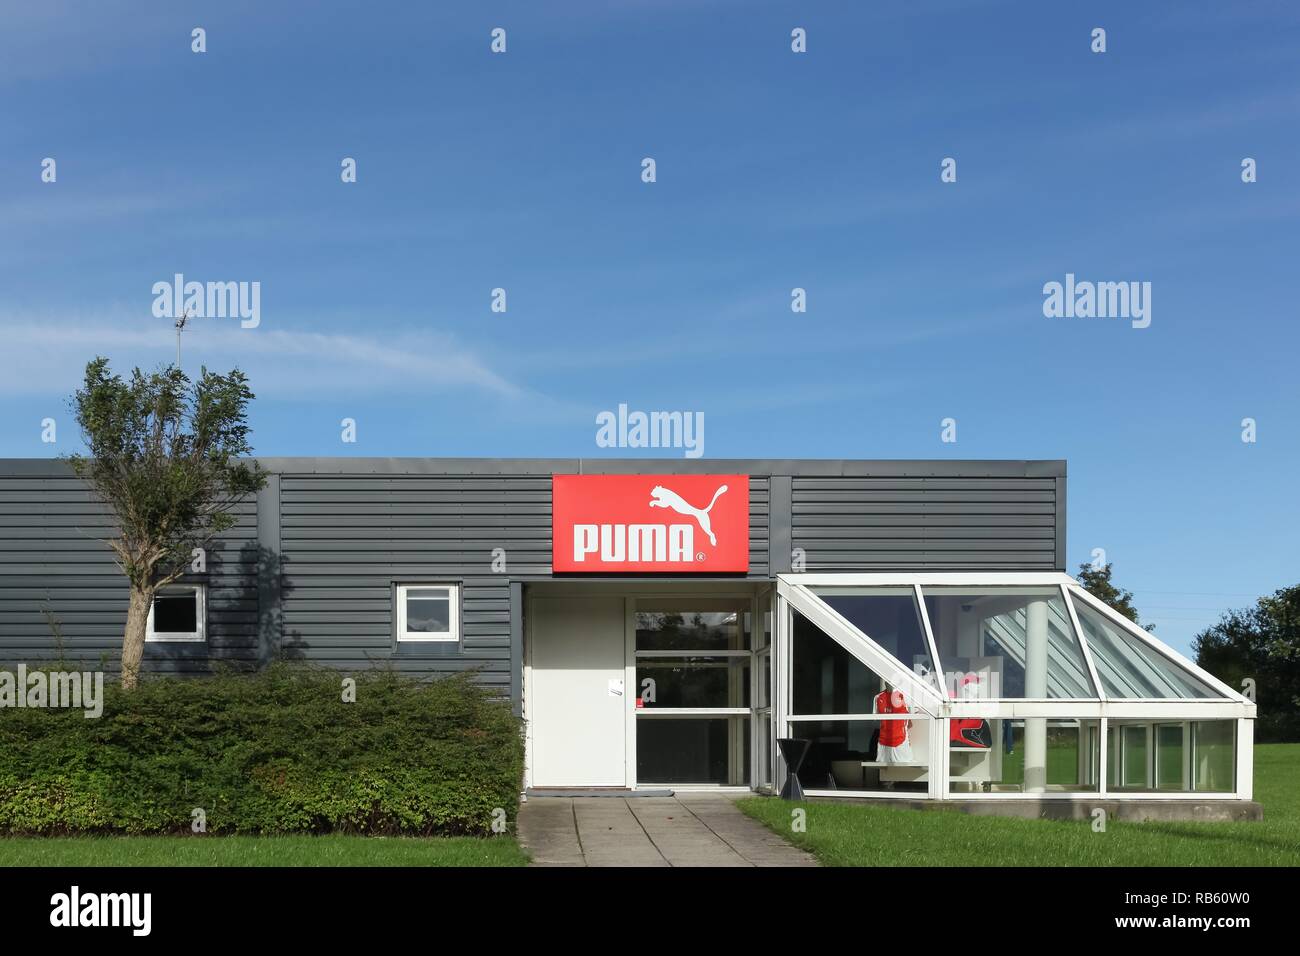 Skanderborg, Denmark - September 6, 2015: Puma logo on a wall. Puma is a major german multinational company that produces athletic and casual footwear Stock Photo